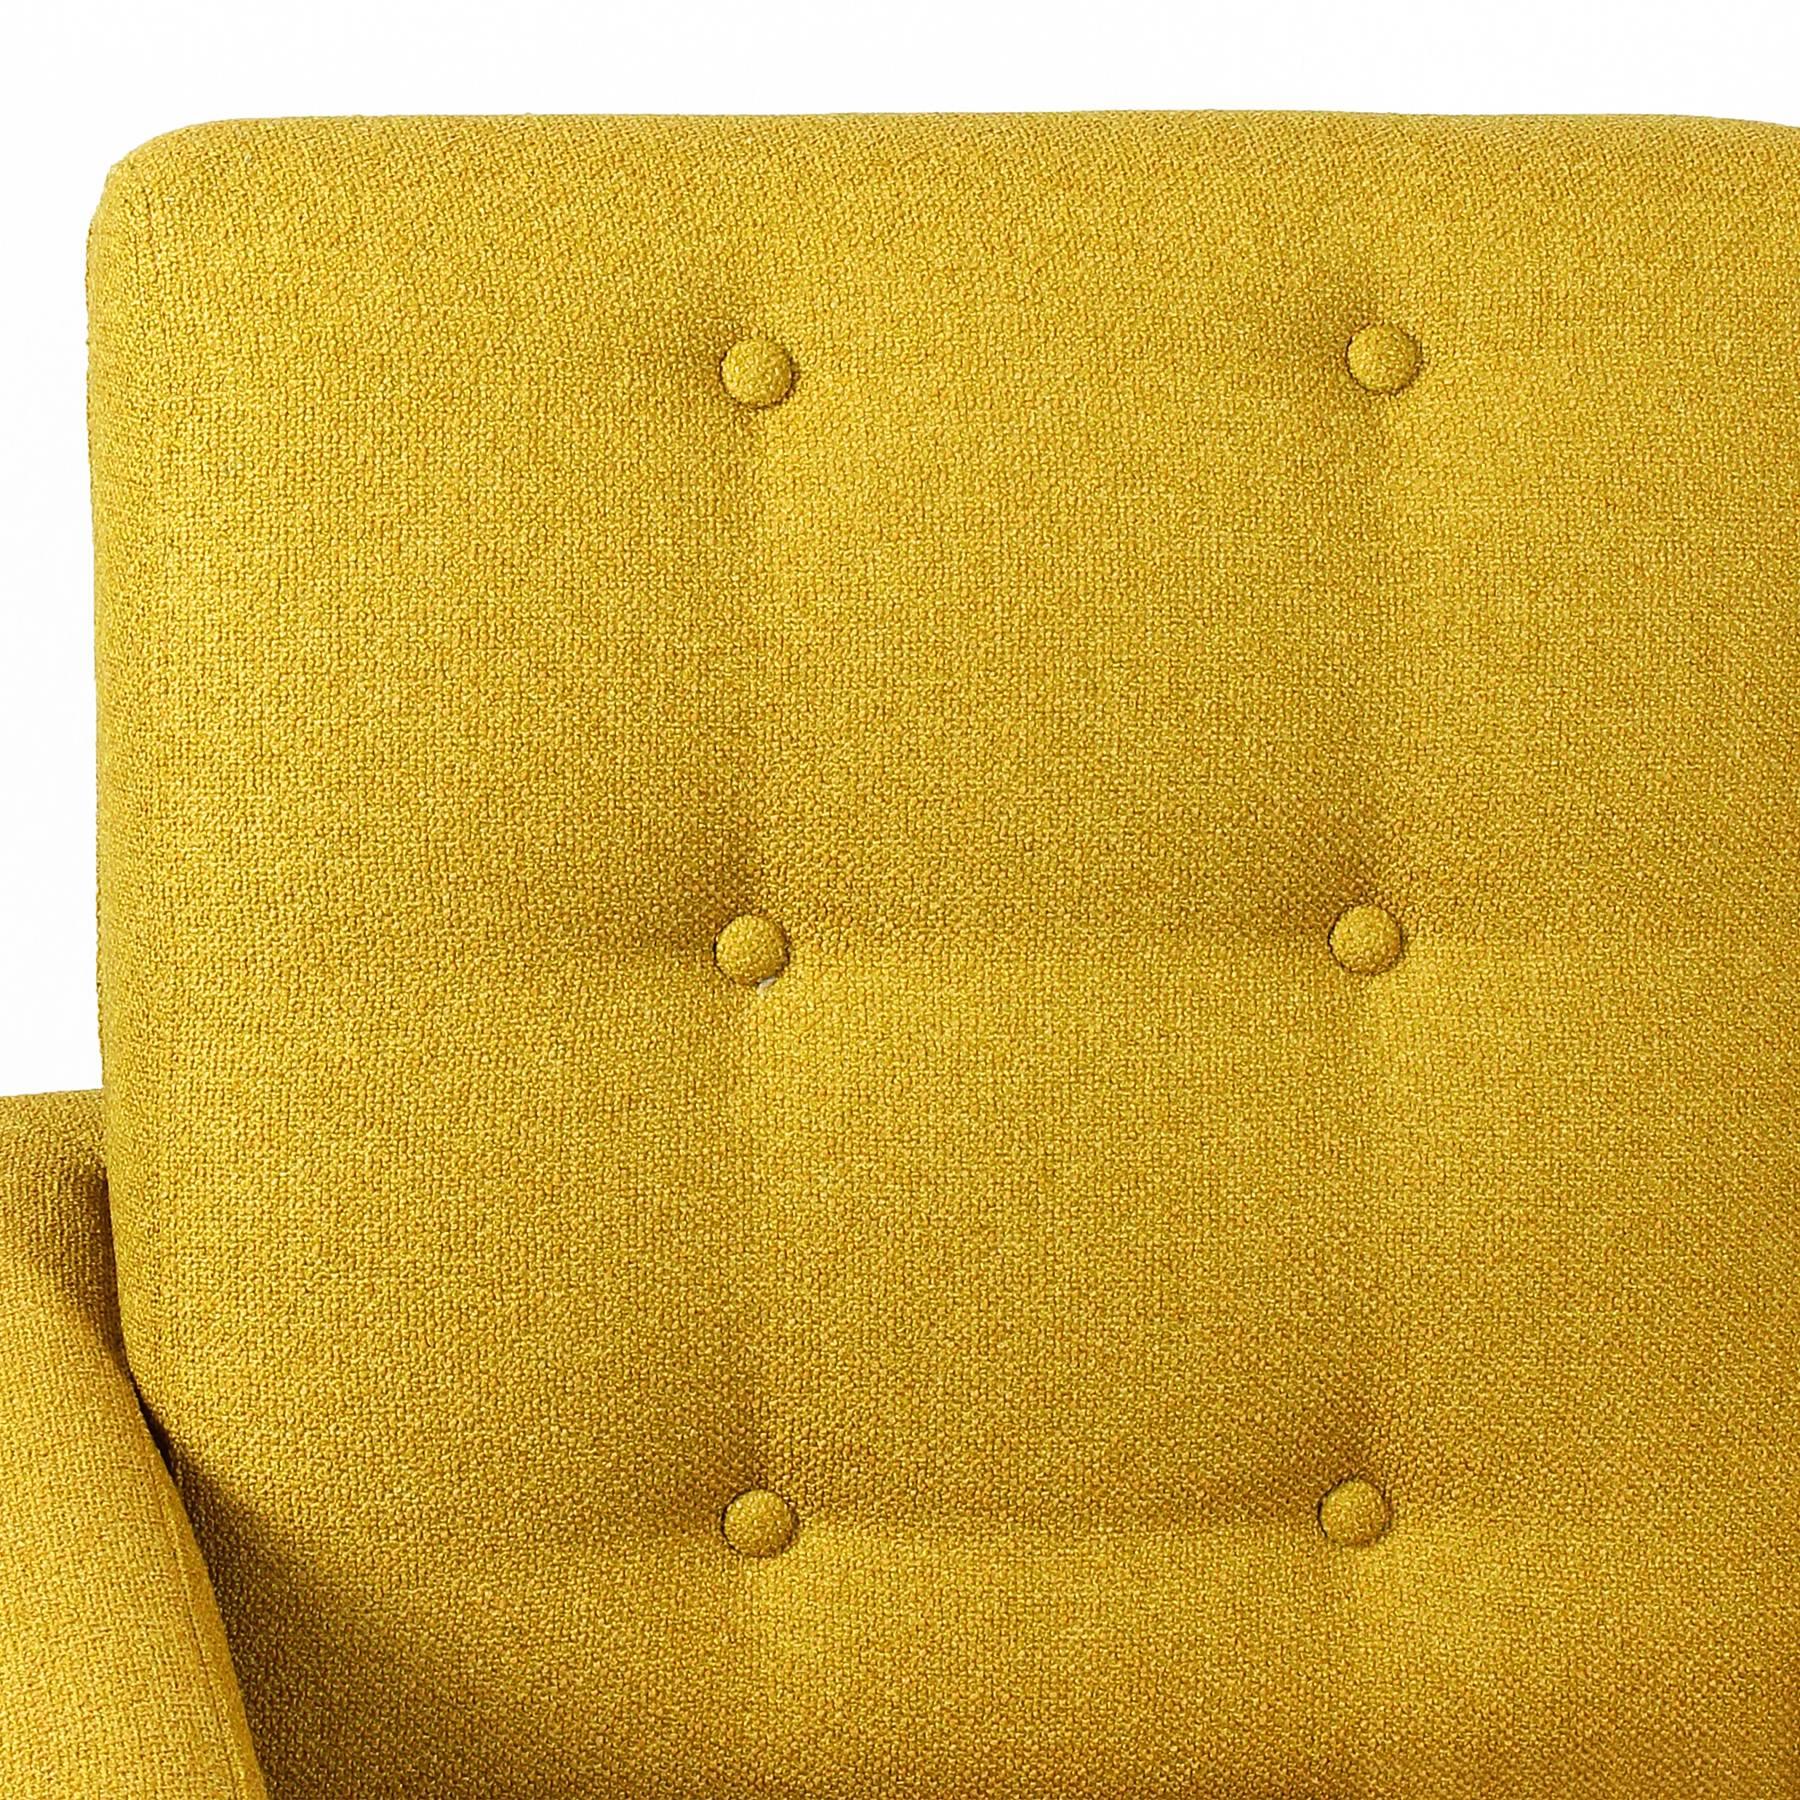 Pair of Mid-Century Modern Padded Armchairs With Yellow-Mustard Fabric - Italy For Sale 4